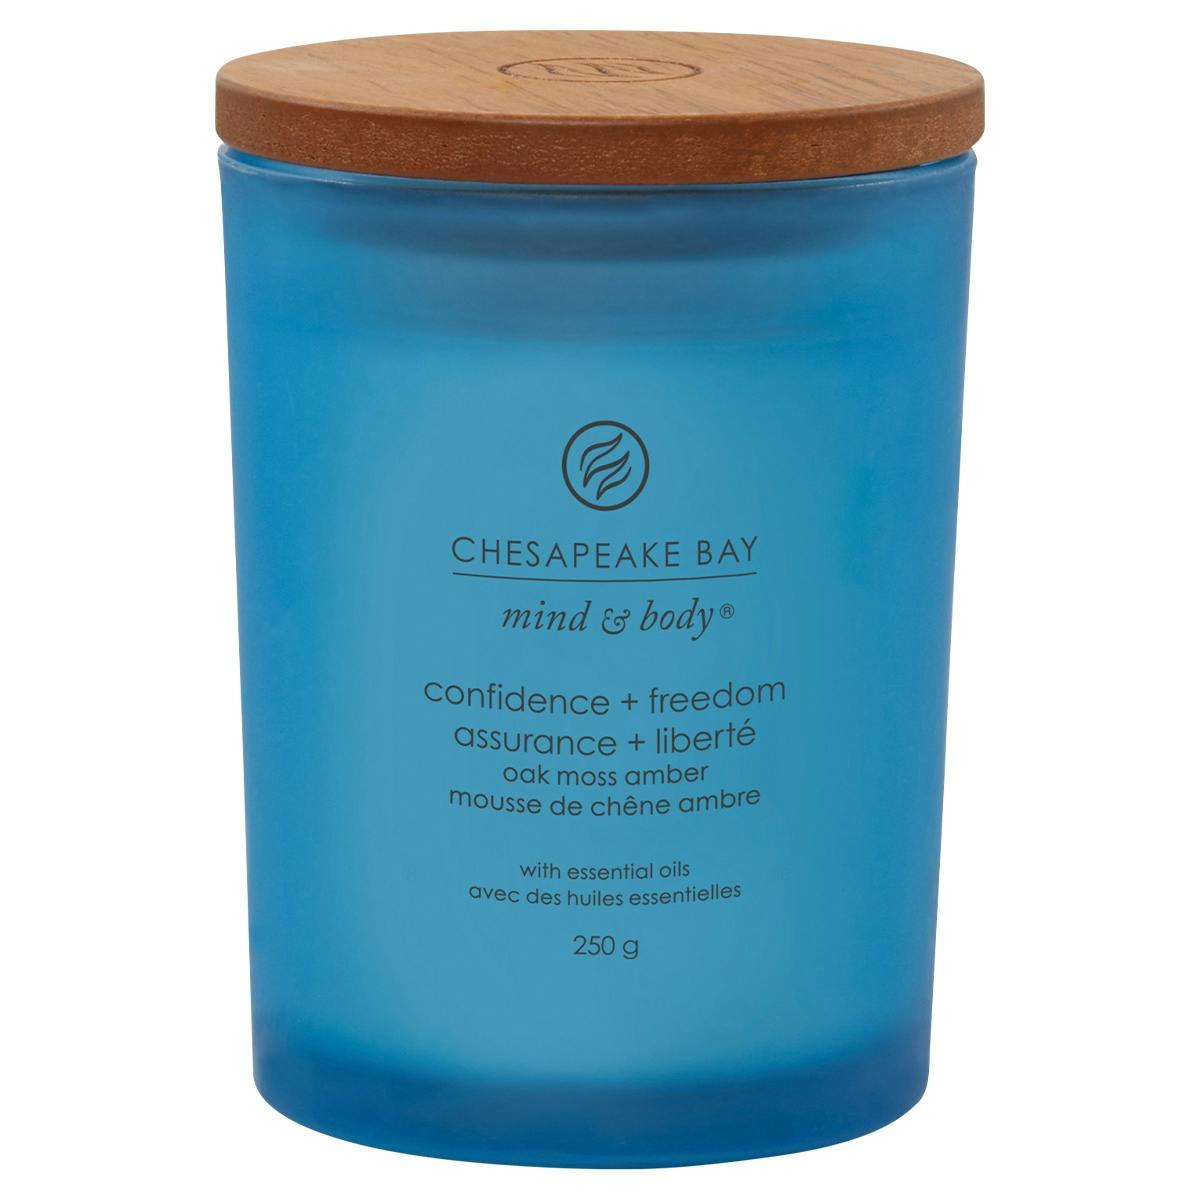 Chesapeake Bay Candle Geurkaars Confidence & Freedom 250 g